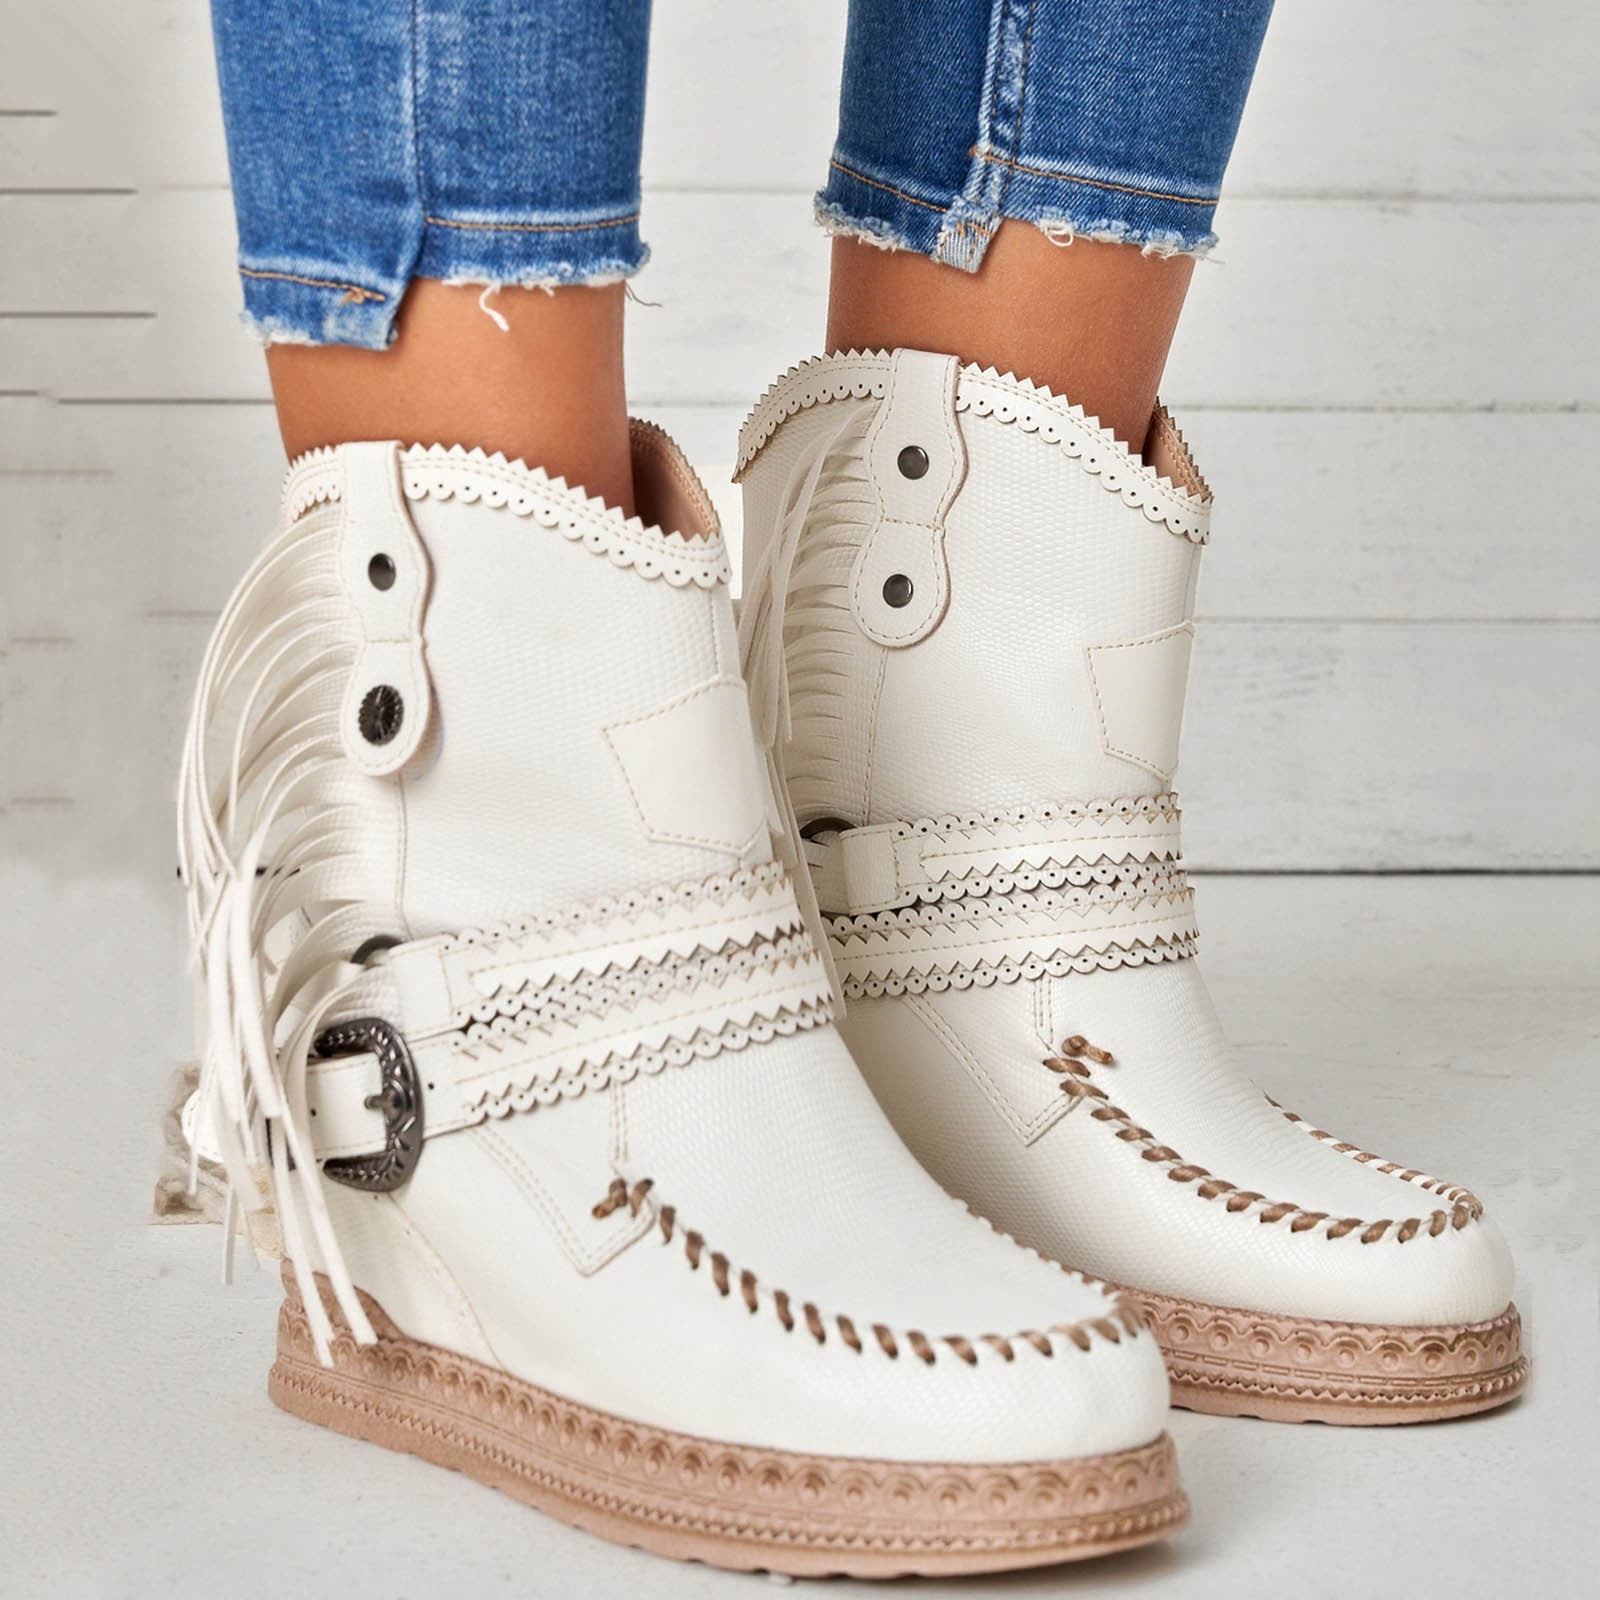 TANGNADE Vintage Women Fringed Western Boots Fashion Solid Color Slip On Boots Outdoor Chunky Heel Booties Shoes - Walmart.com